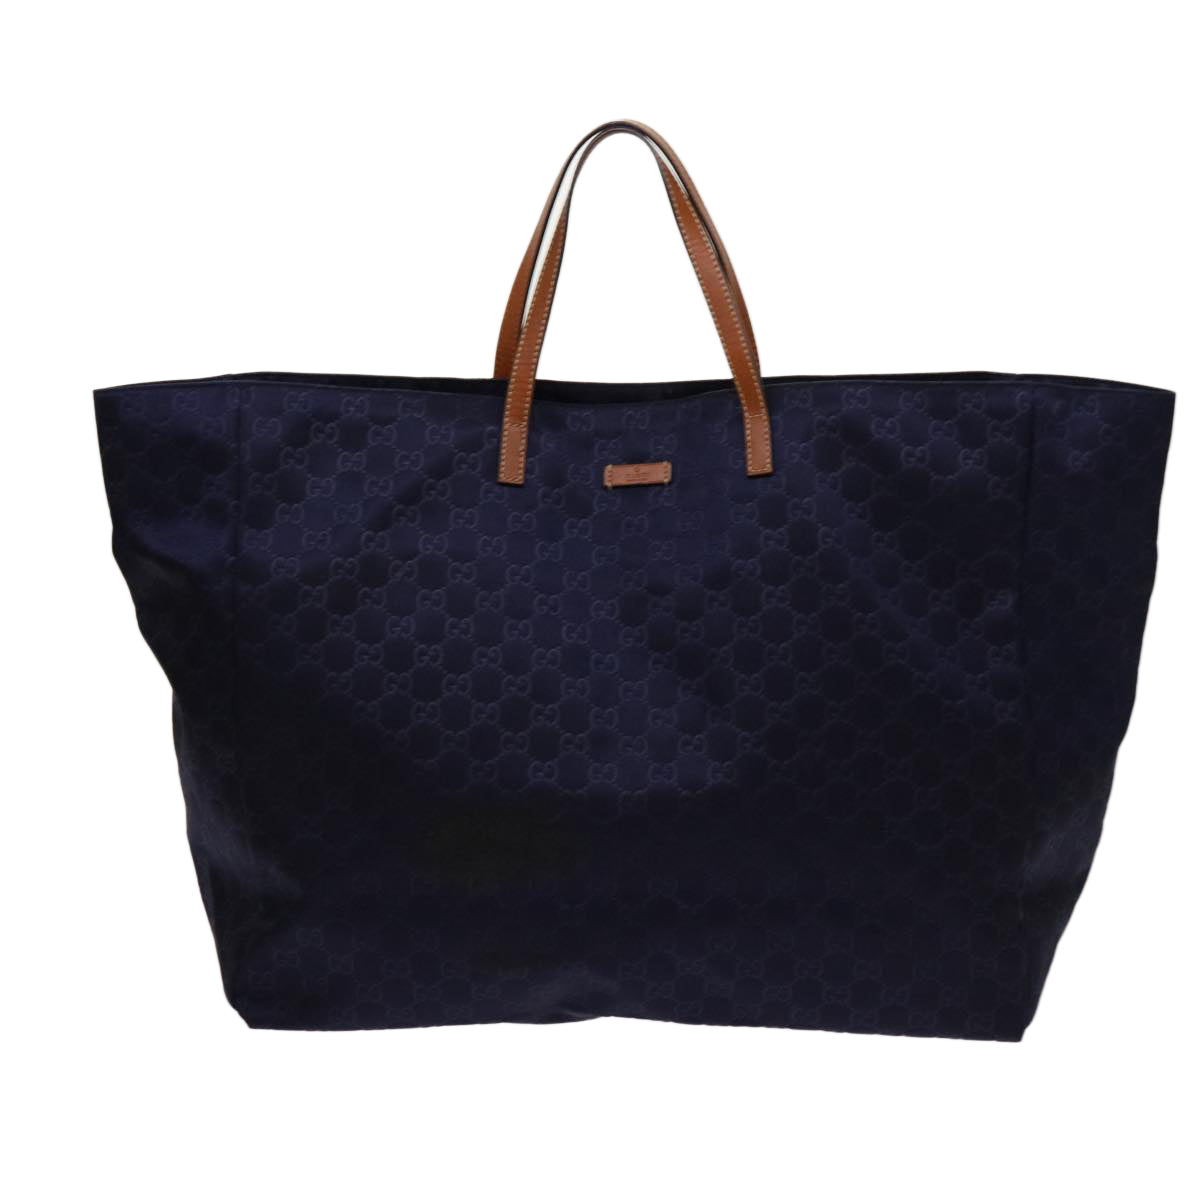 GUCCI GG Canvas Tote Bag Navy 286198 Auth 69951 - 0